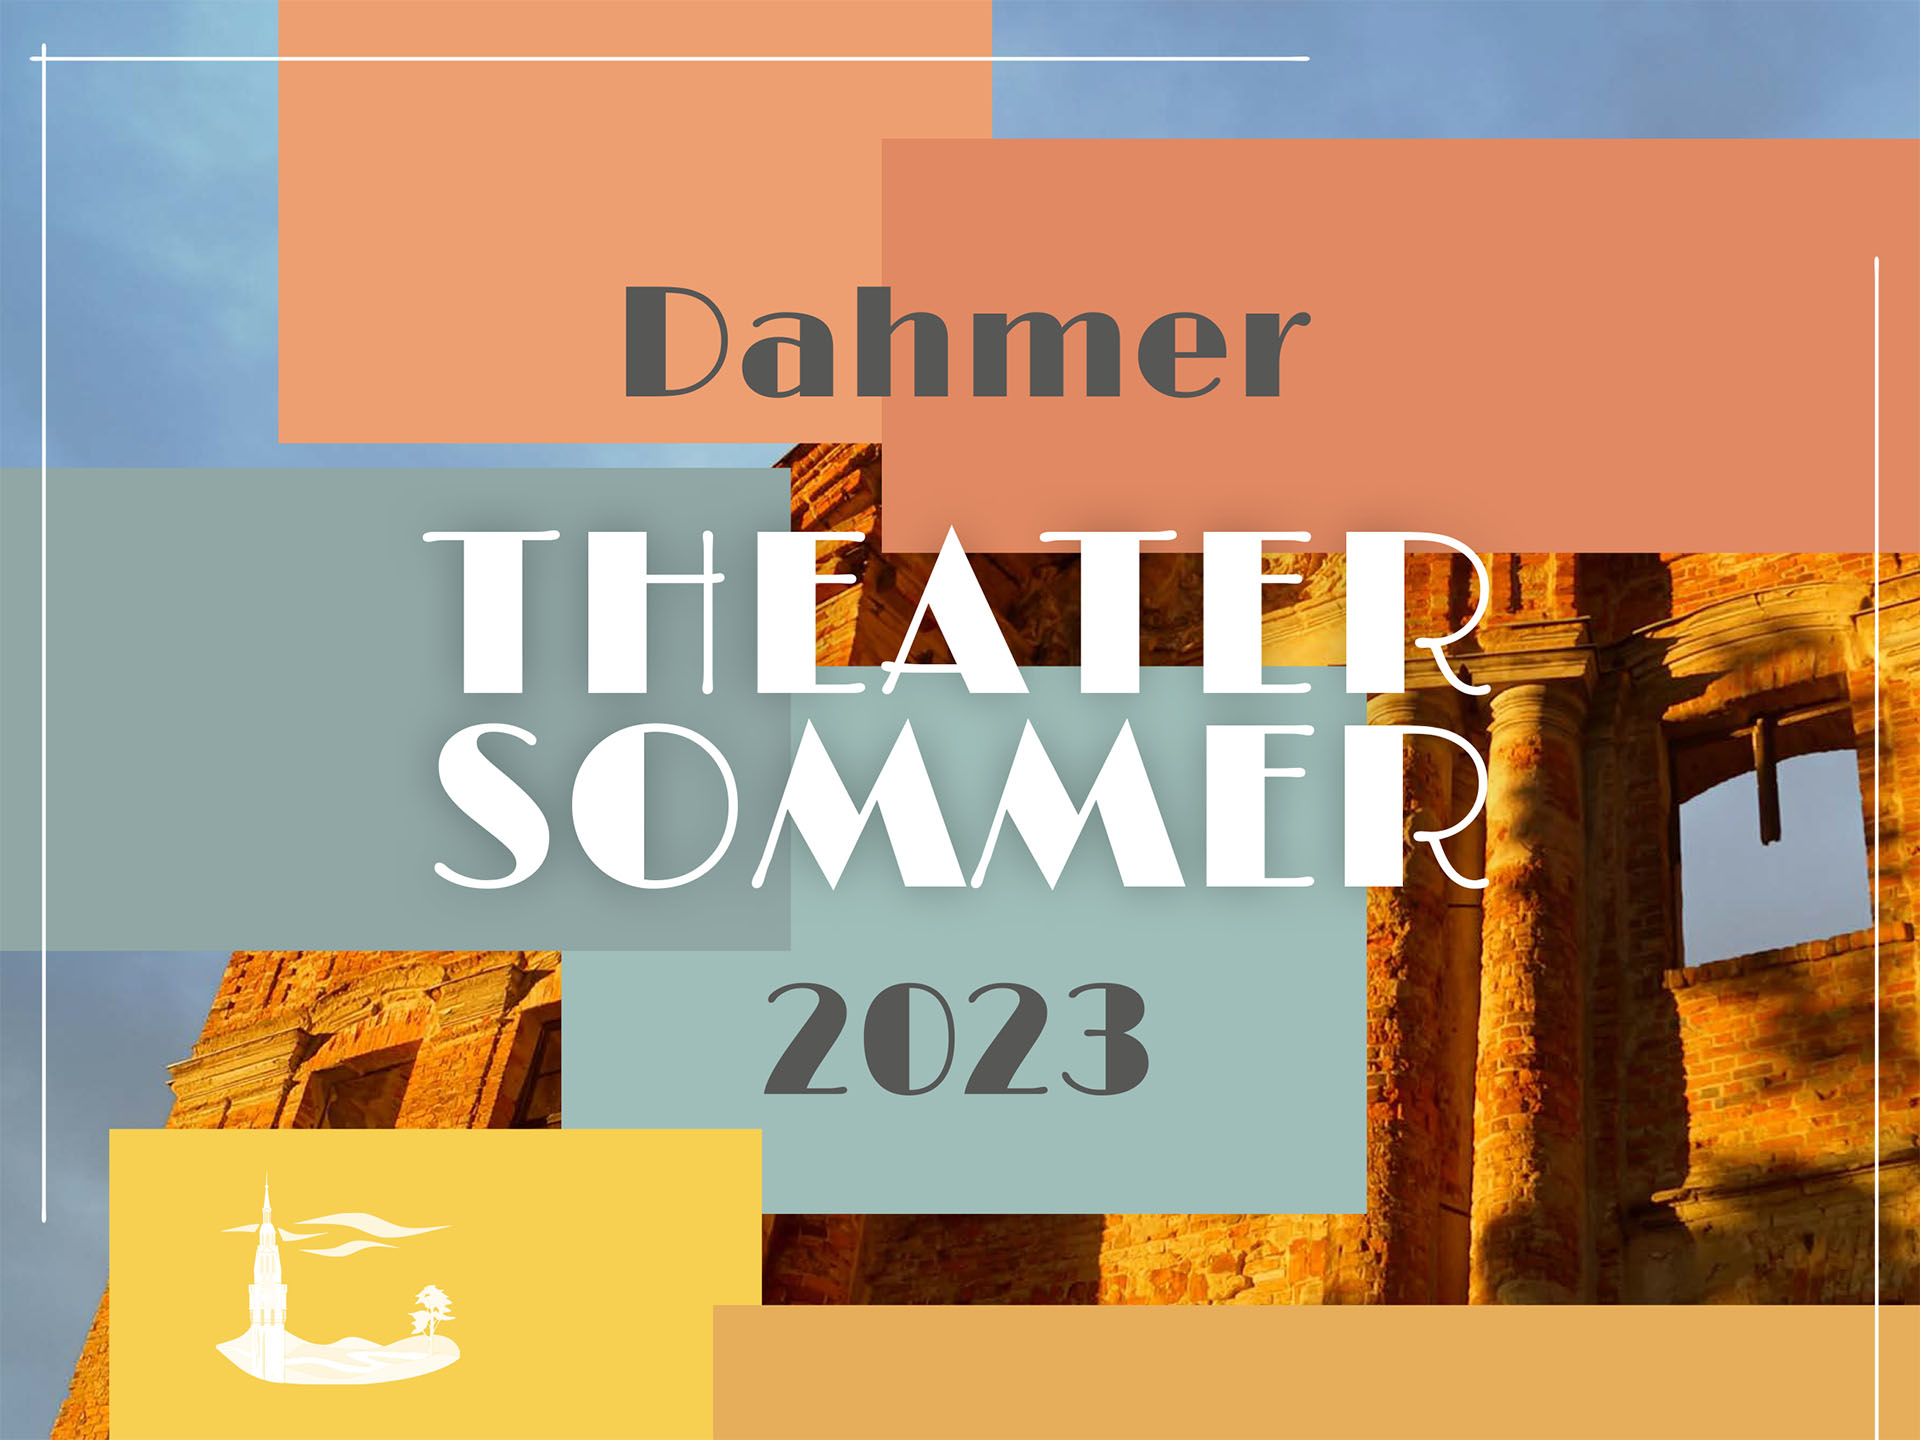 Dahmer Theater Sommer 2023